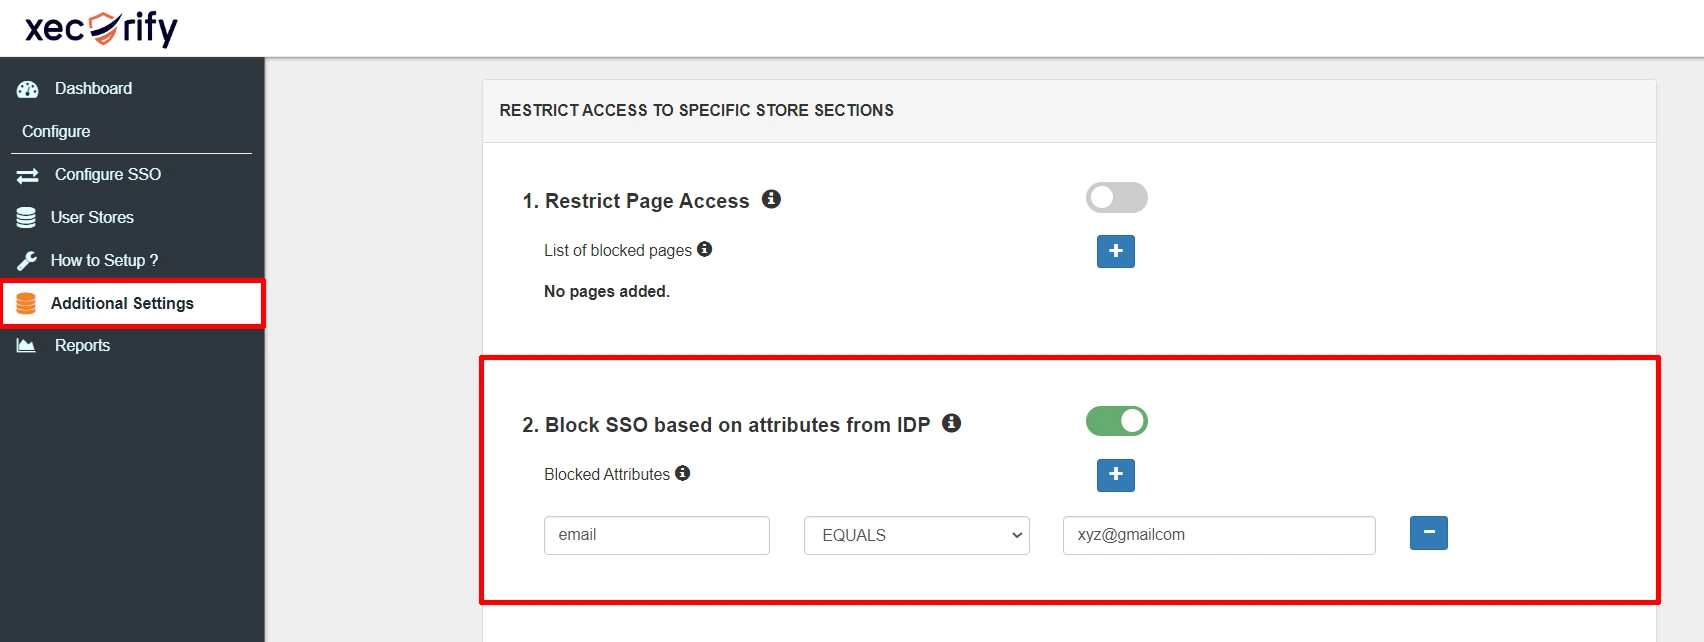 Shopify Single Sign-On (SSO) - Block SSO based on attributes from IDP